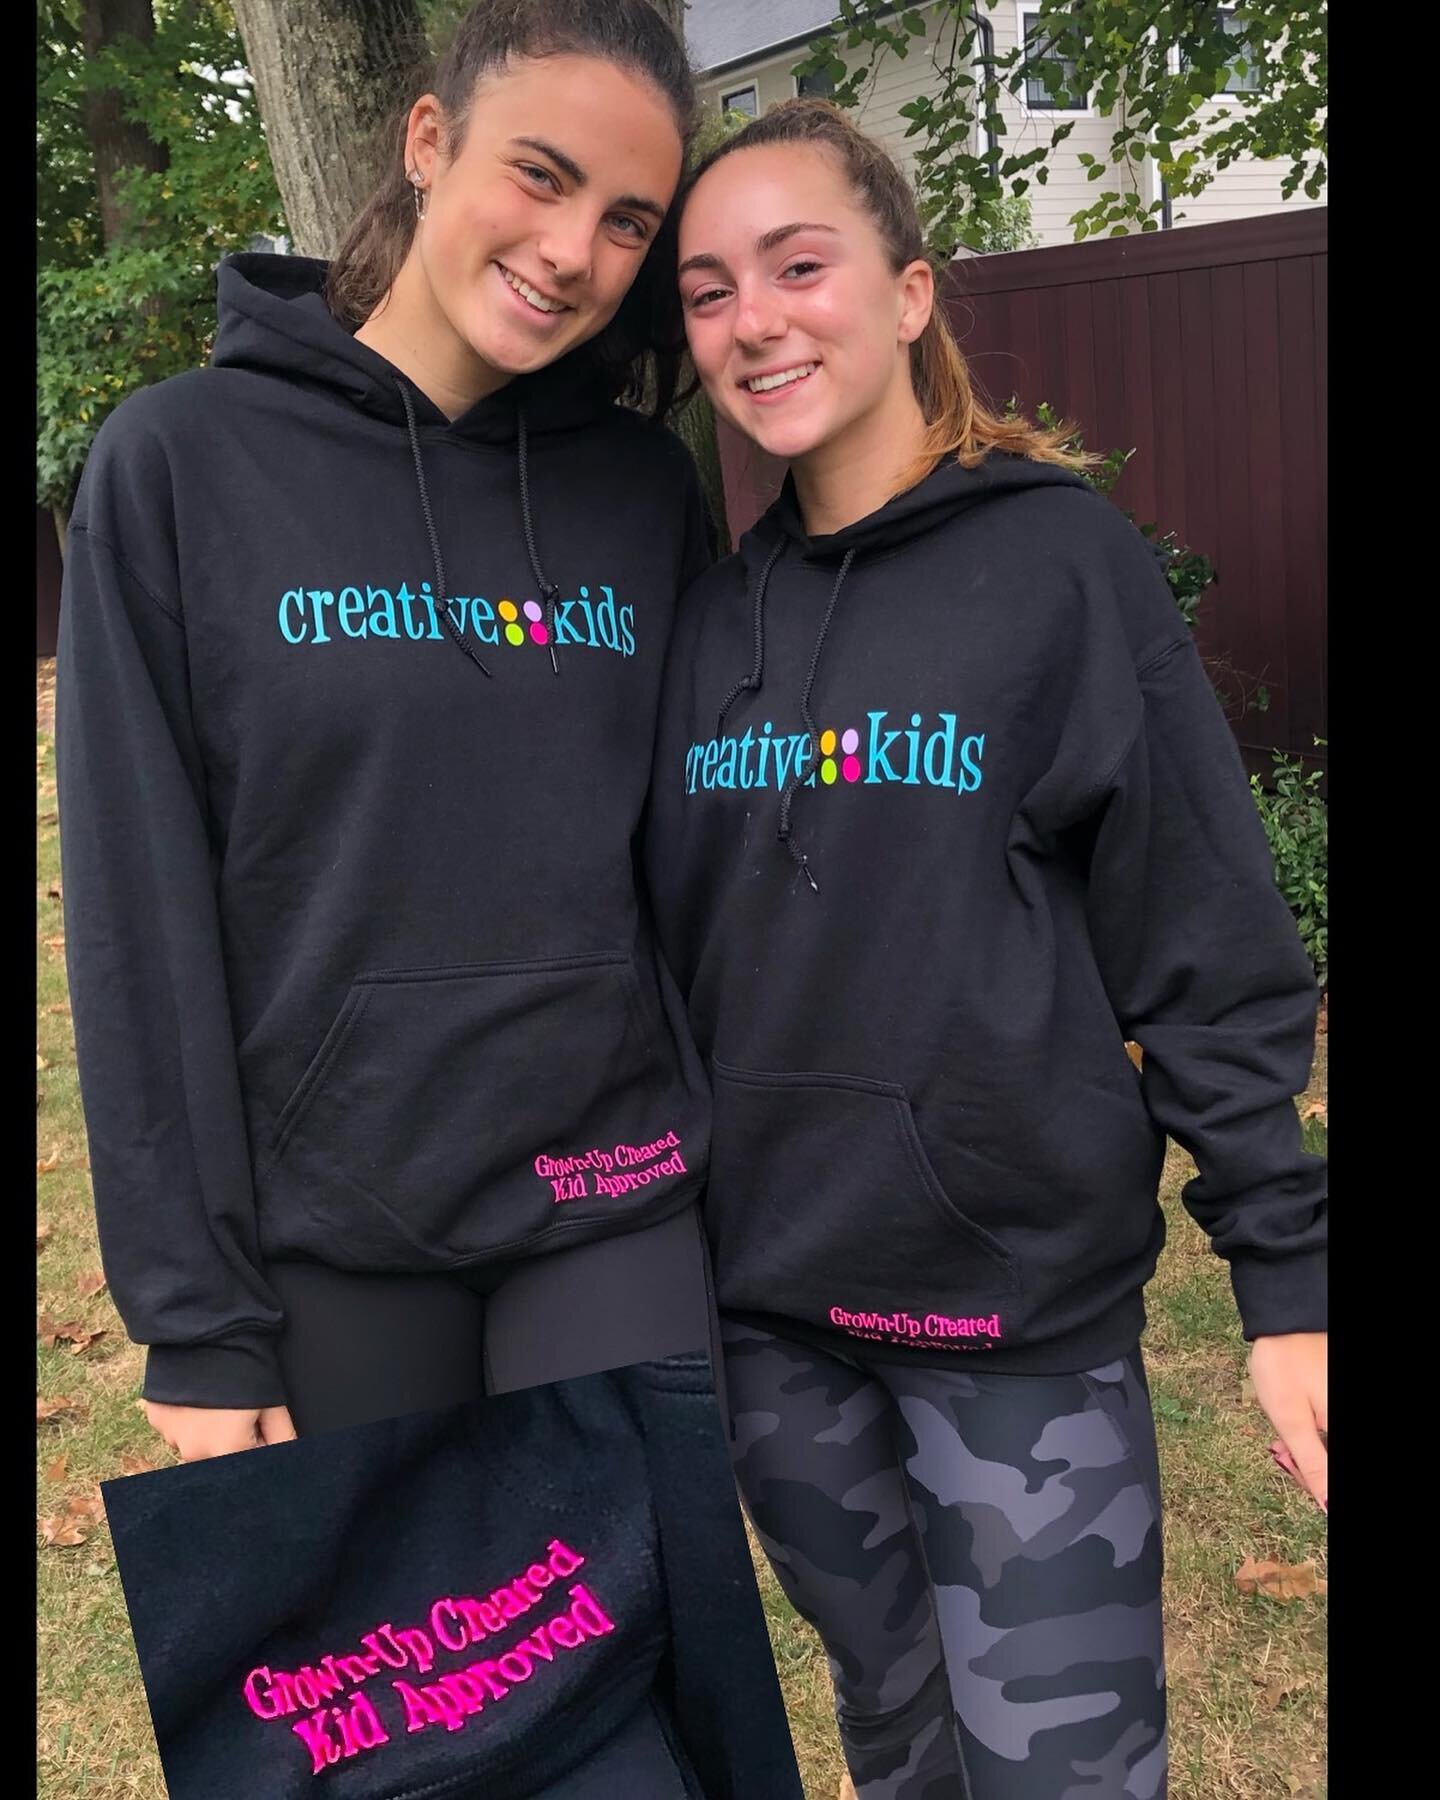 Loving our new sweatshirts from @blairitspartytime! Not only did she deliver a fab design but she also delivered a baby immediately after!